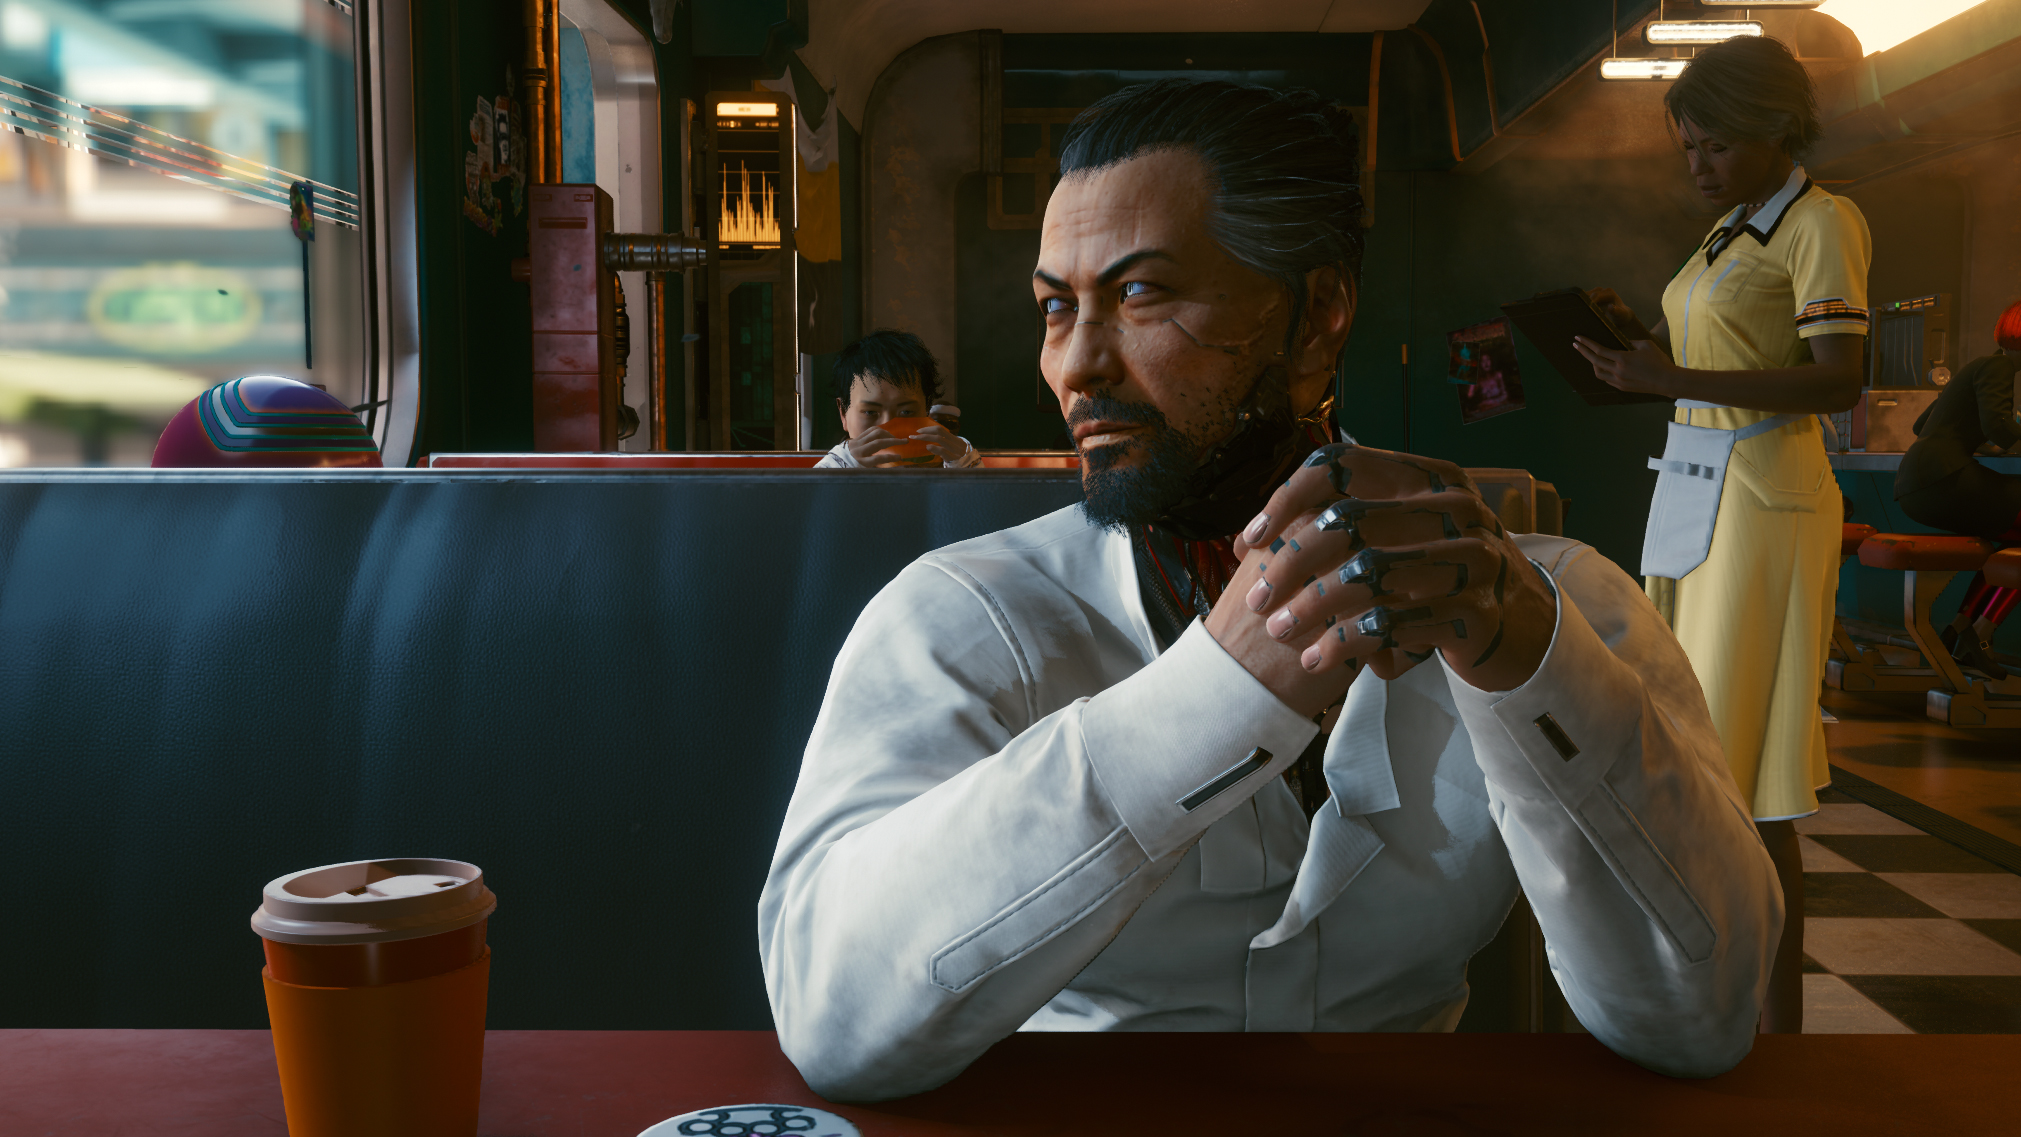  Cyberpunk 2077 fixes more quest bugs, frees Takemura from getting stuck 